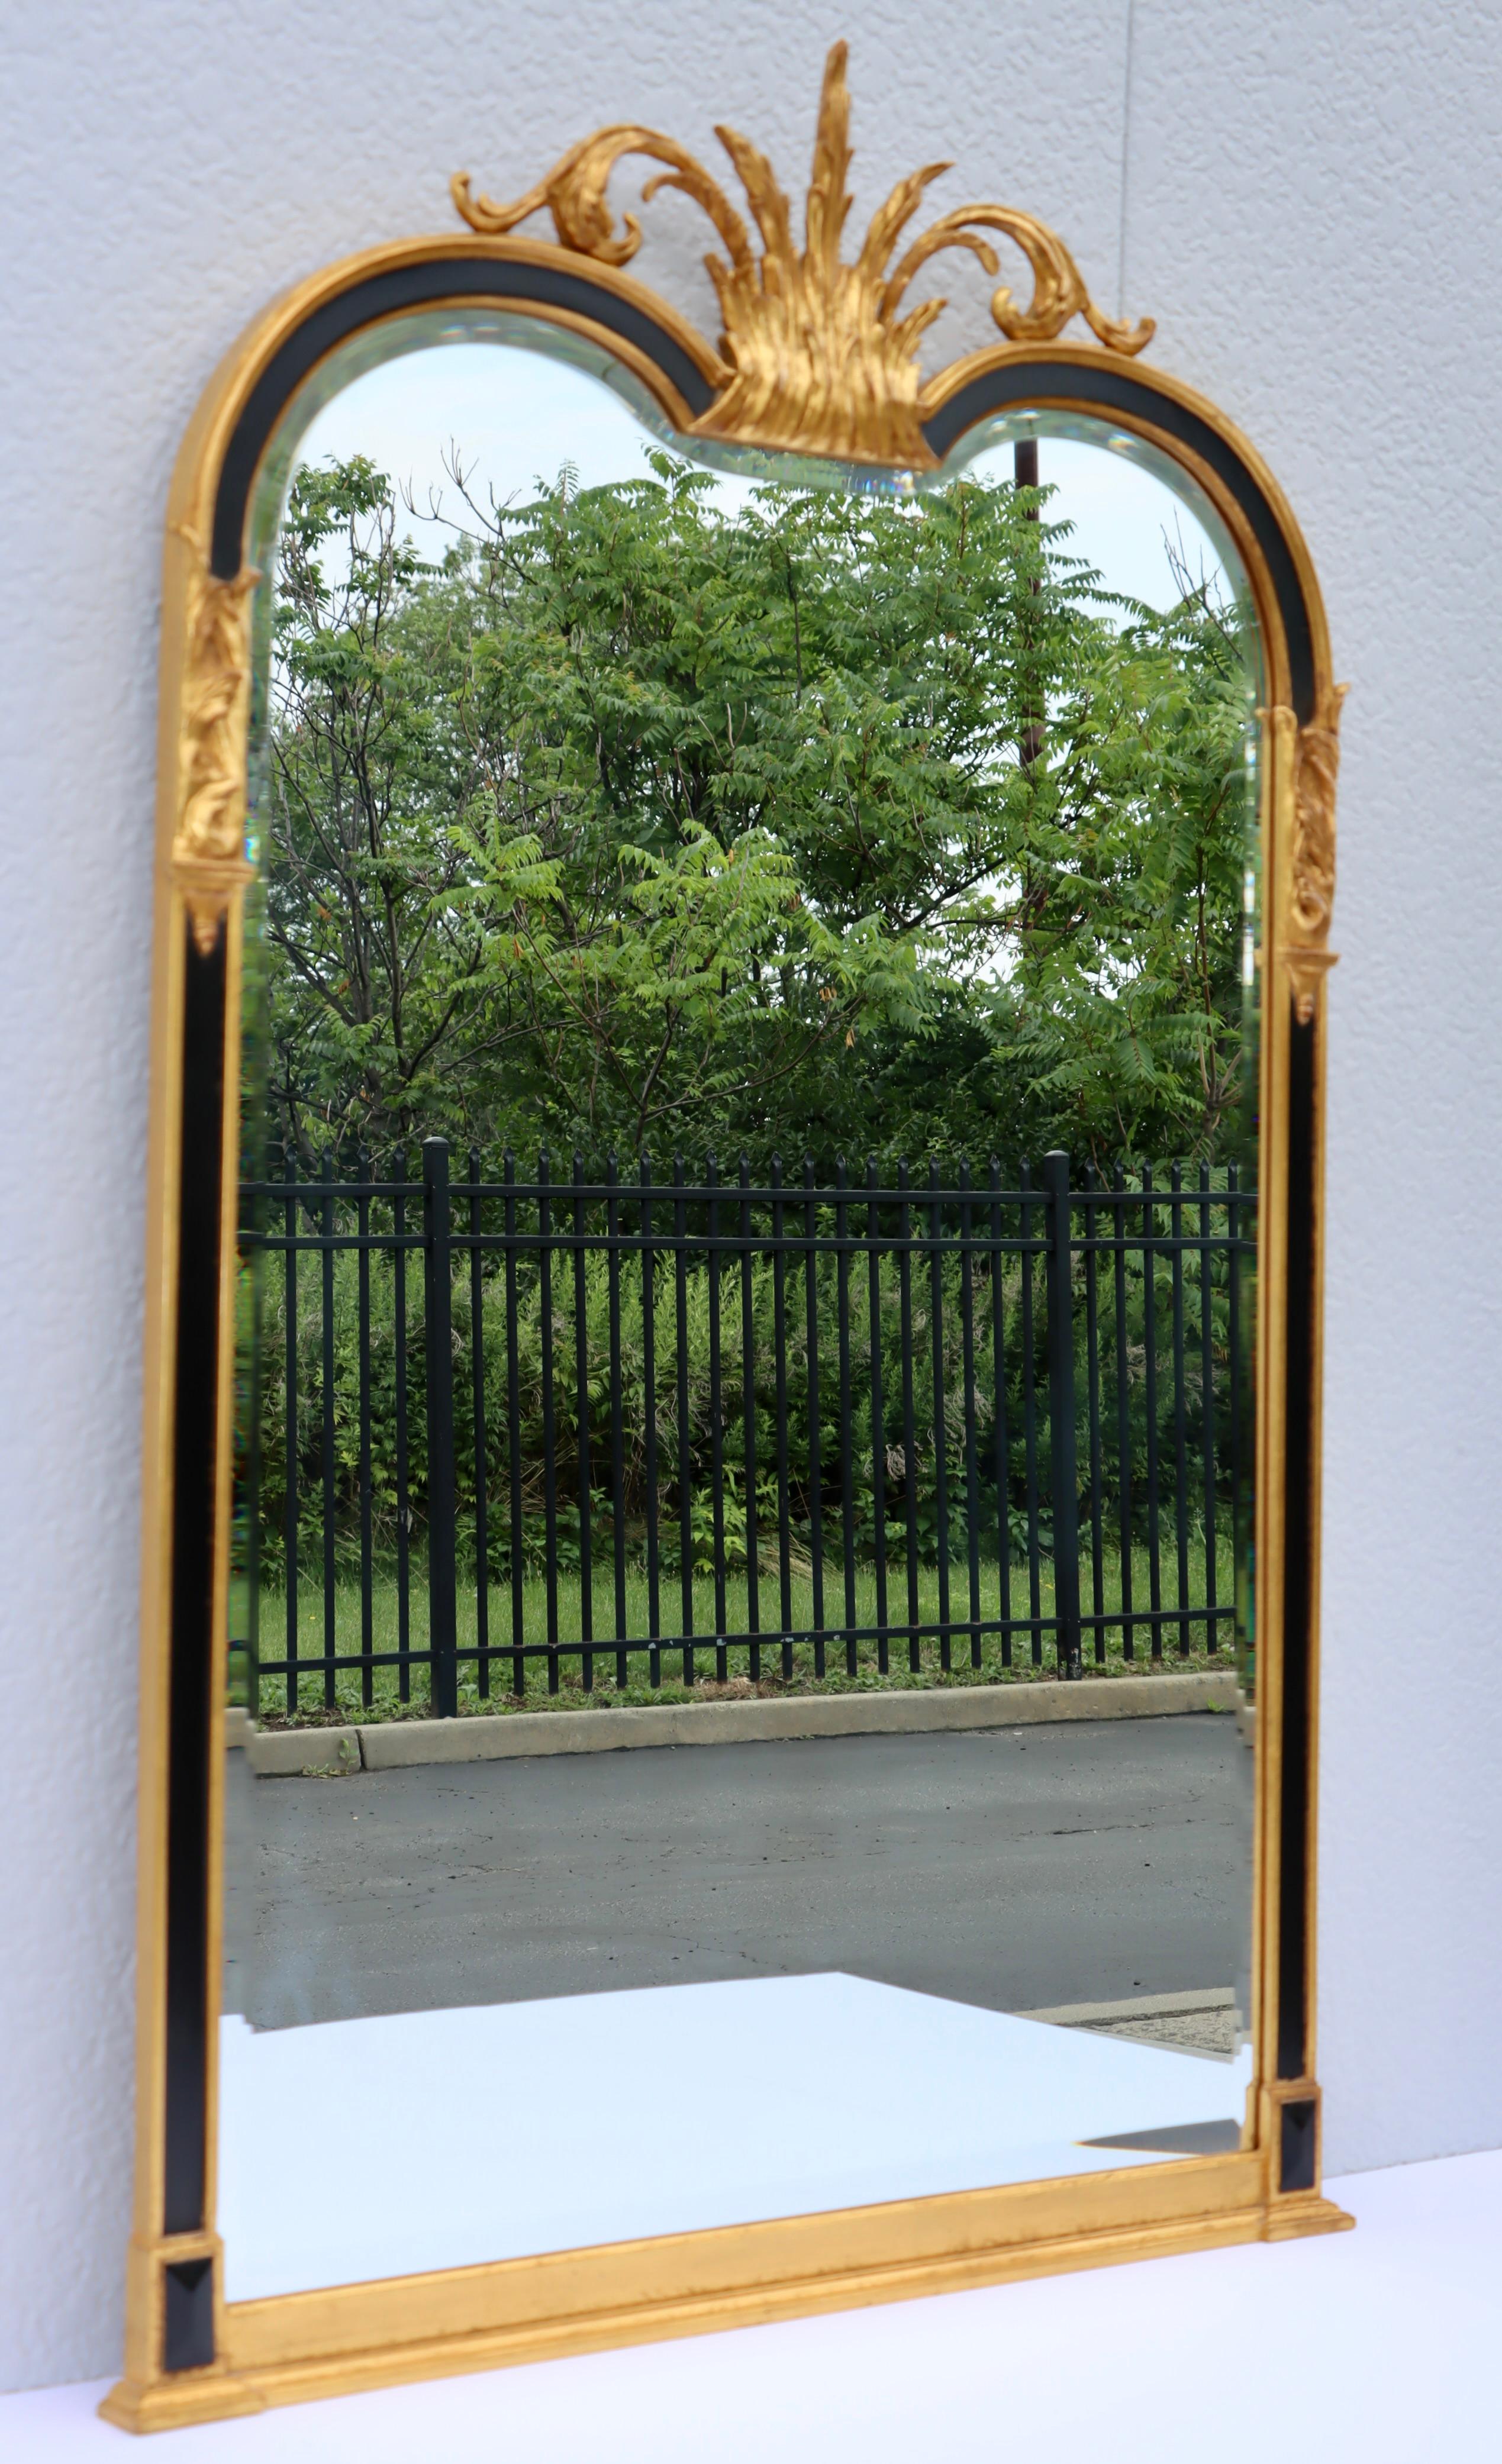 Hollywood Regency 1960's Gilt Beveled Wall Mirror By Carver's Guild 